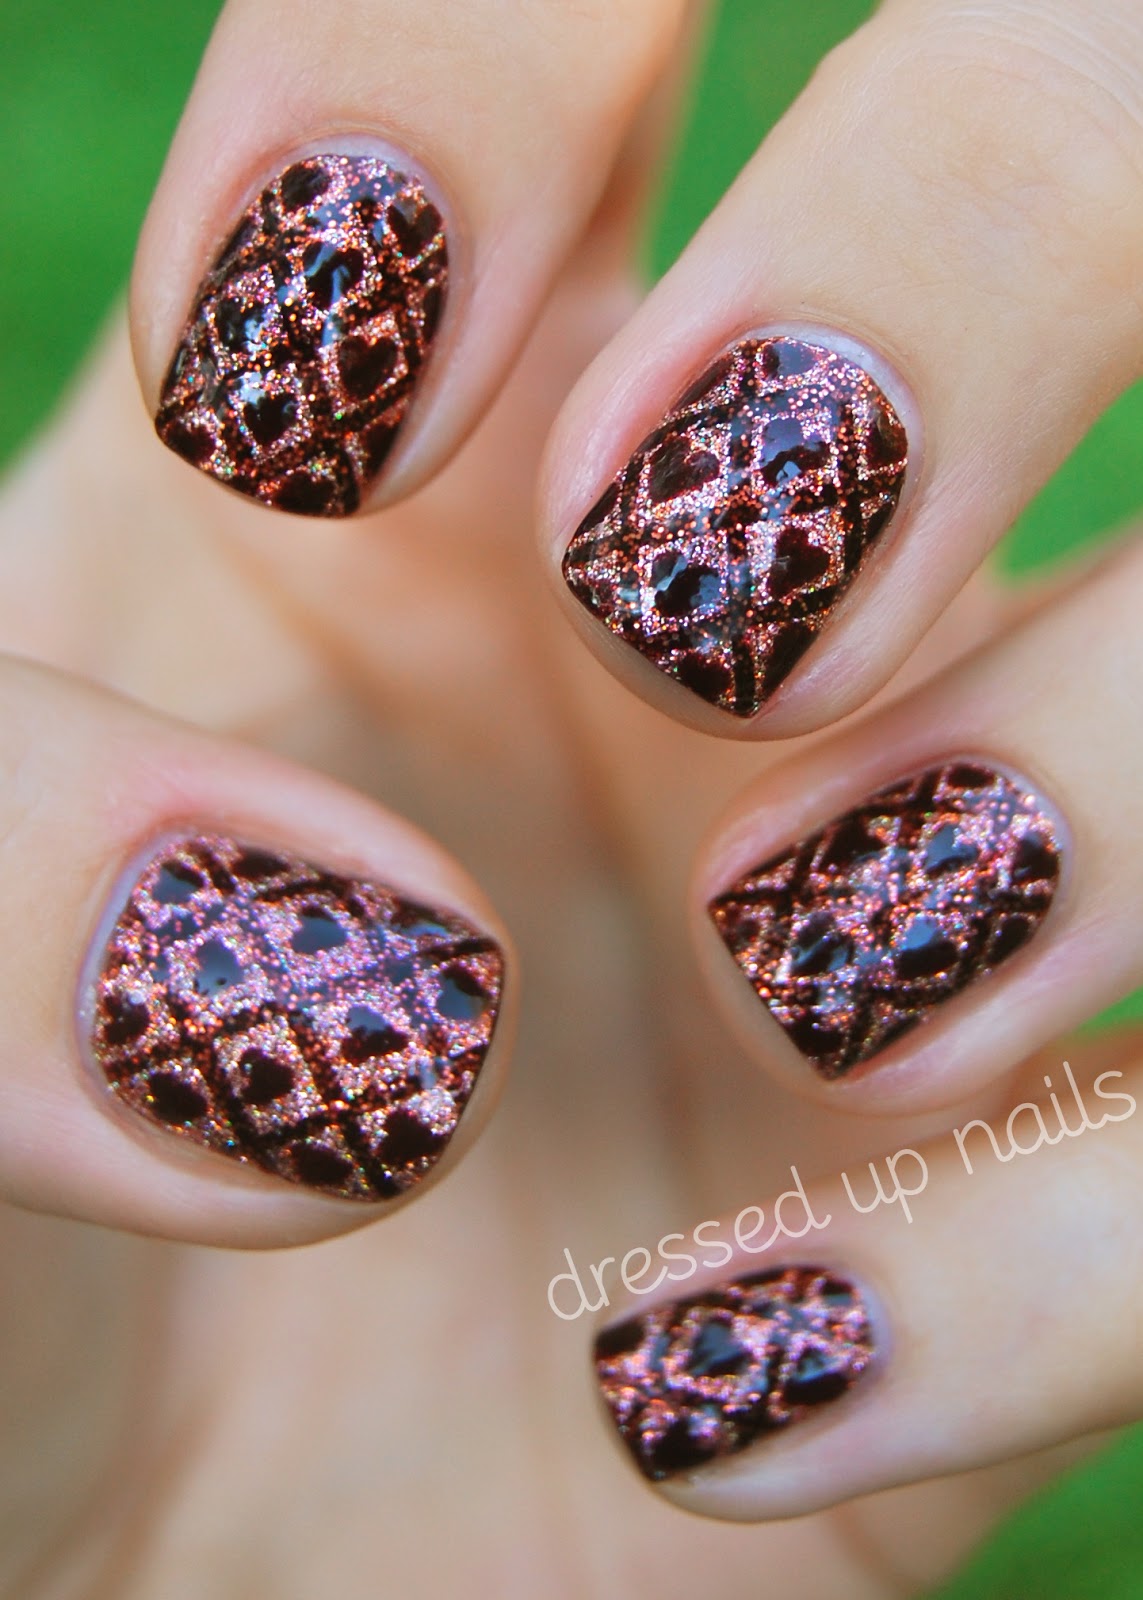 Dressed Up Nails: Ornate wallpaper nail art with hearts and GLITTER!